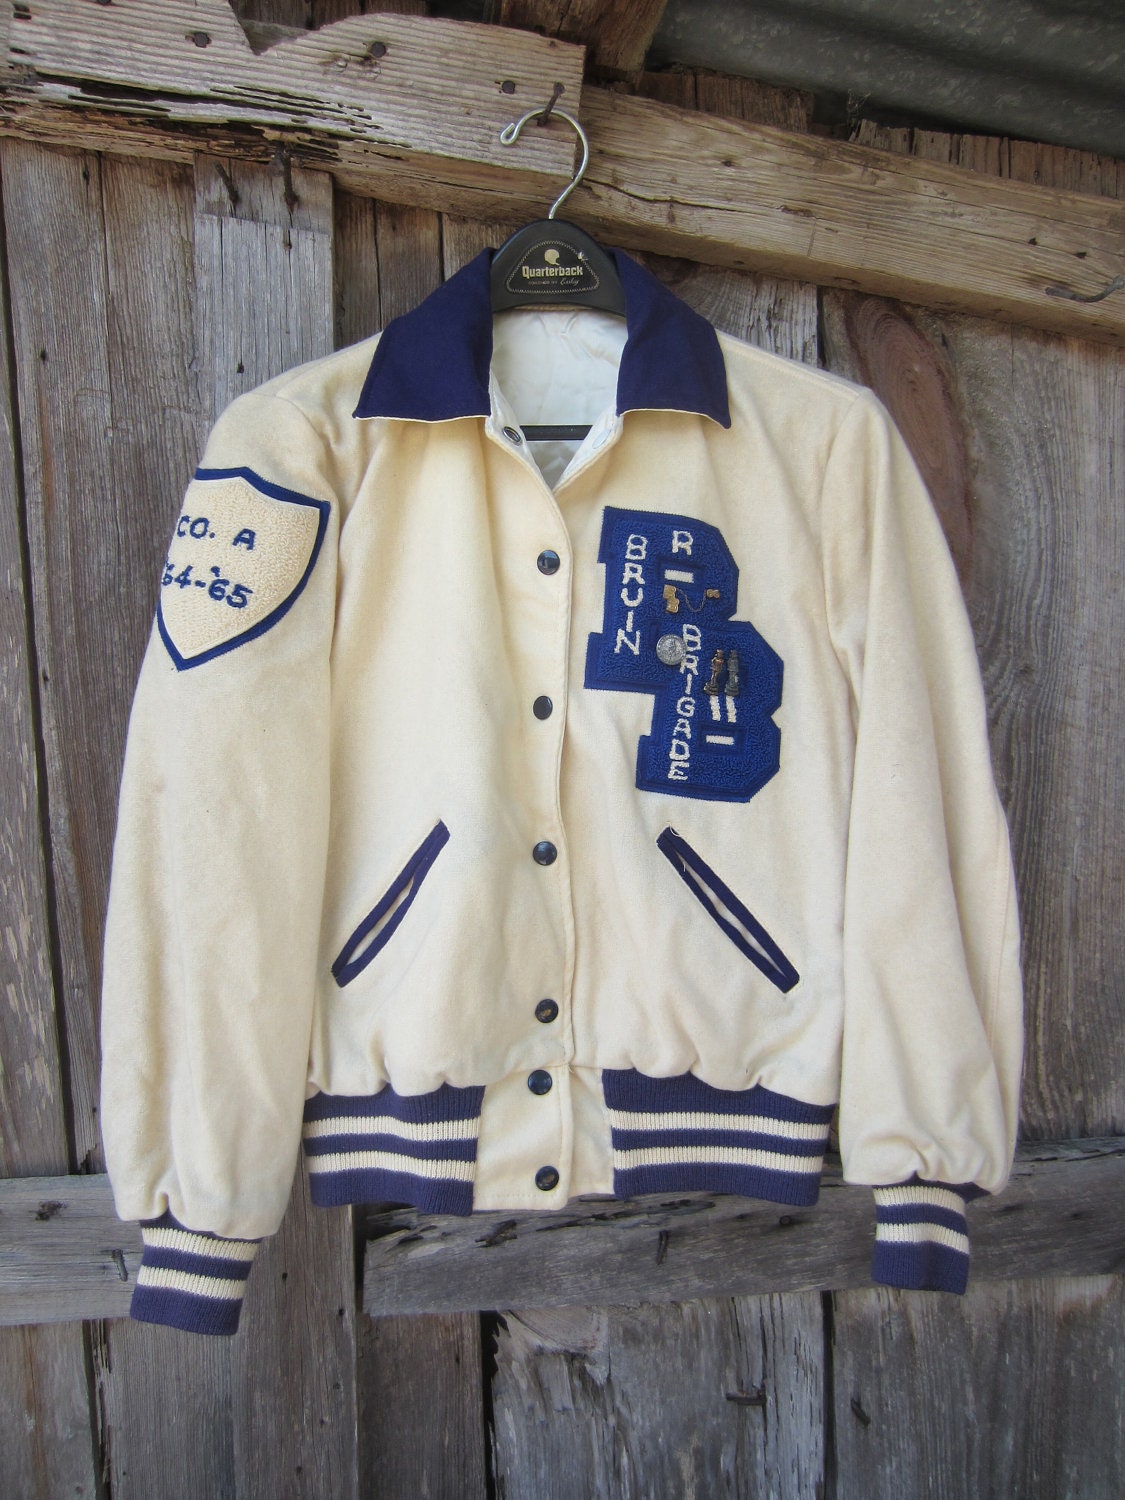 1964 Majorette Letterman Jacket w/ Pins and Medals S // 60s